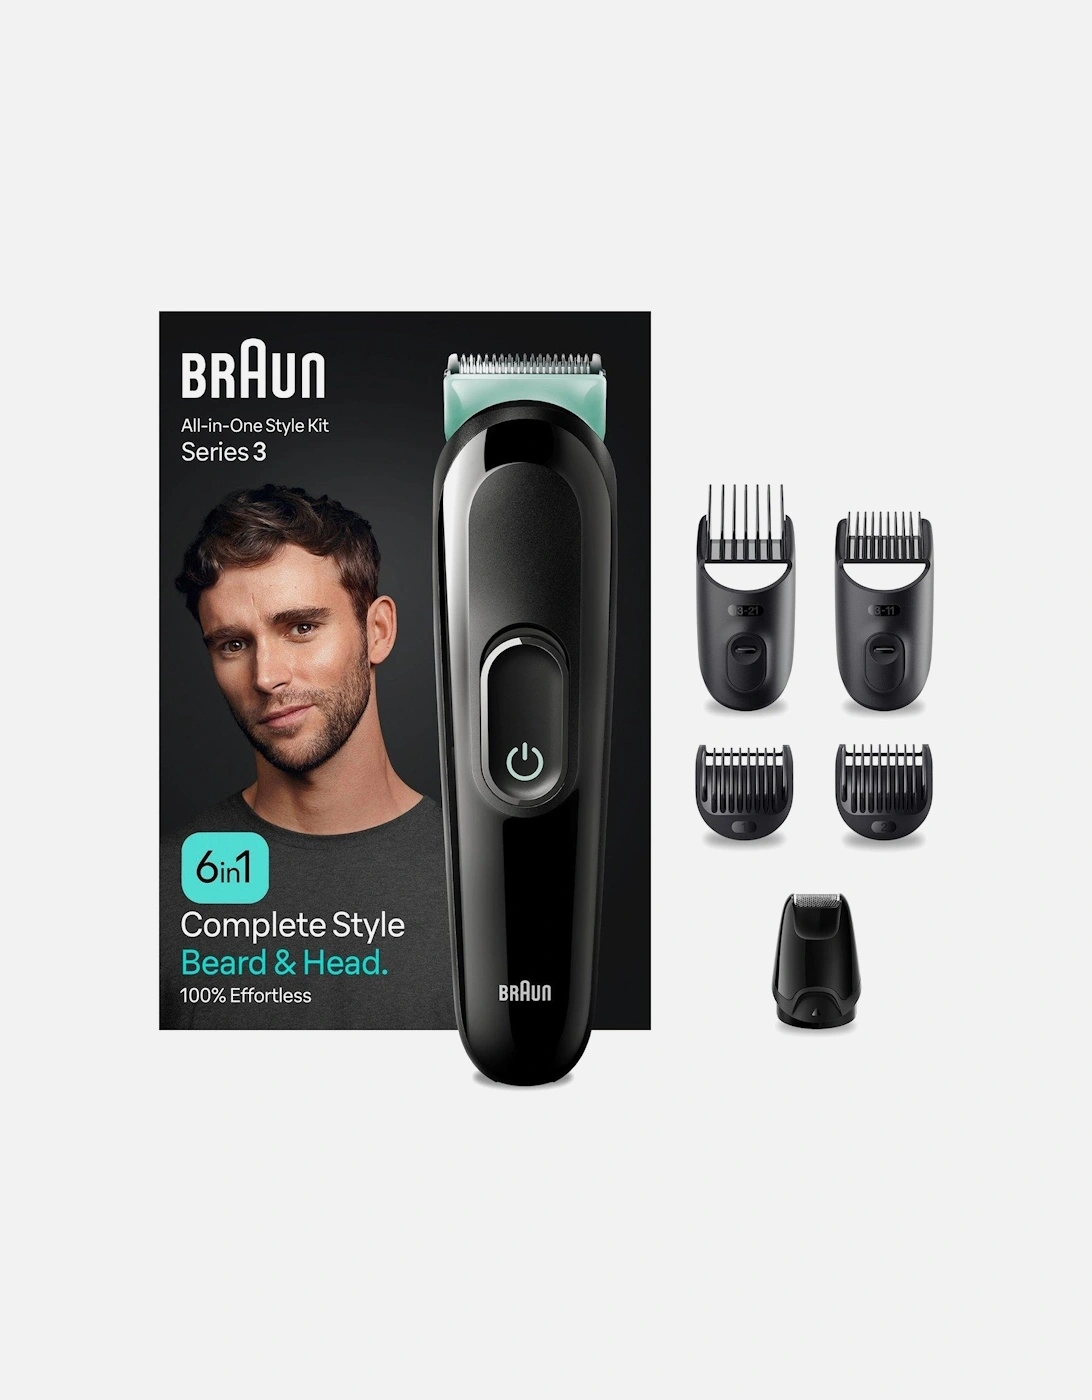 All-In-One Style Kit Series 3 MGK3411, 6-in1 Kit For Beard, Hair & More